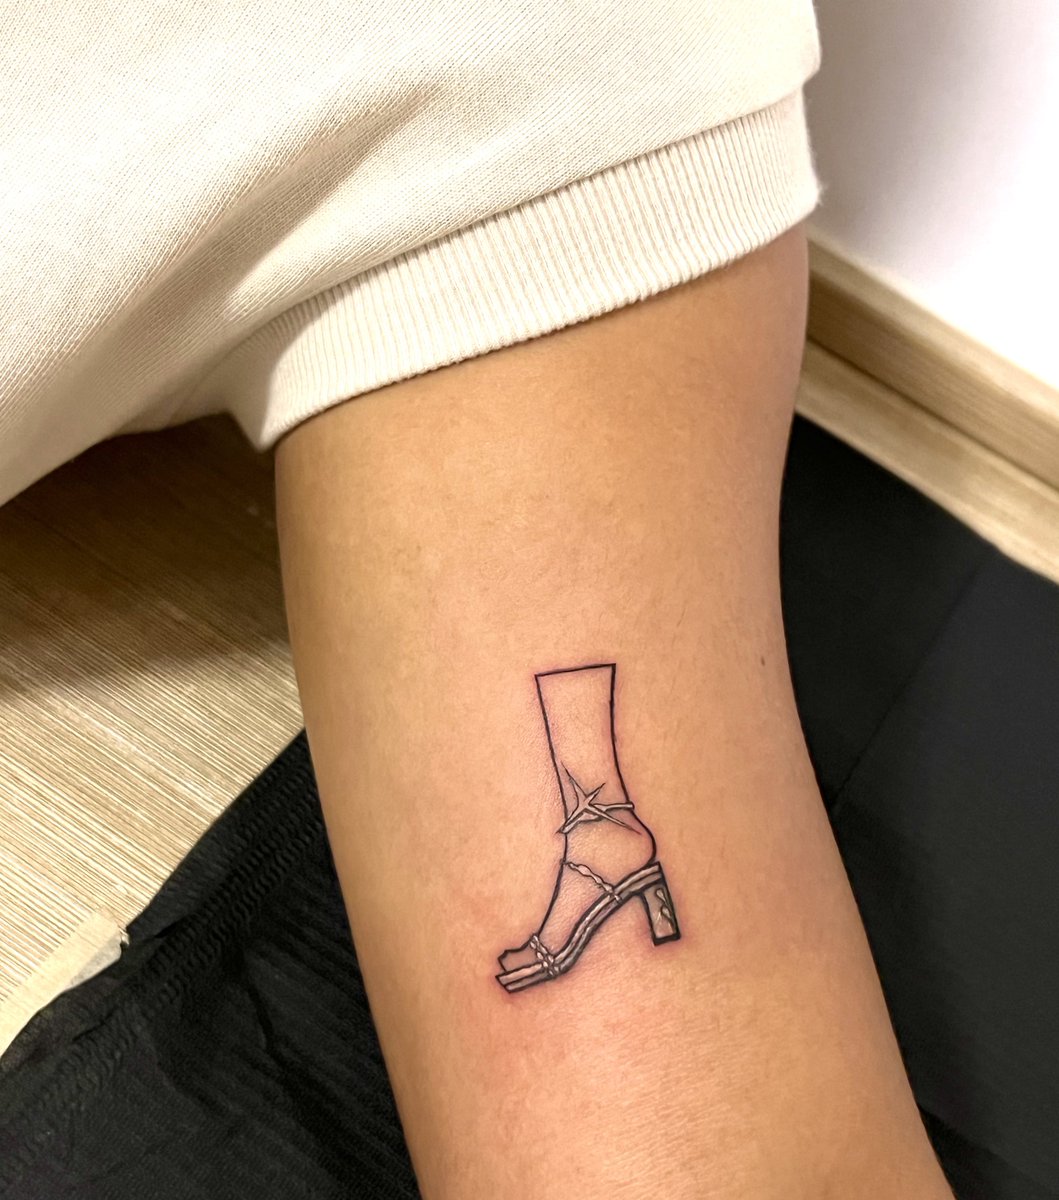 Today last year, we filmed my elimination from the show. I think today’s the right time to get it and embrace THE SHOOOEEES! 🖋️👡 #DragRacePH 

Illustrator @DiscoJerDee 
Tattoo artist @pinkmilkpapi